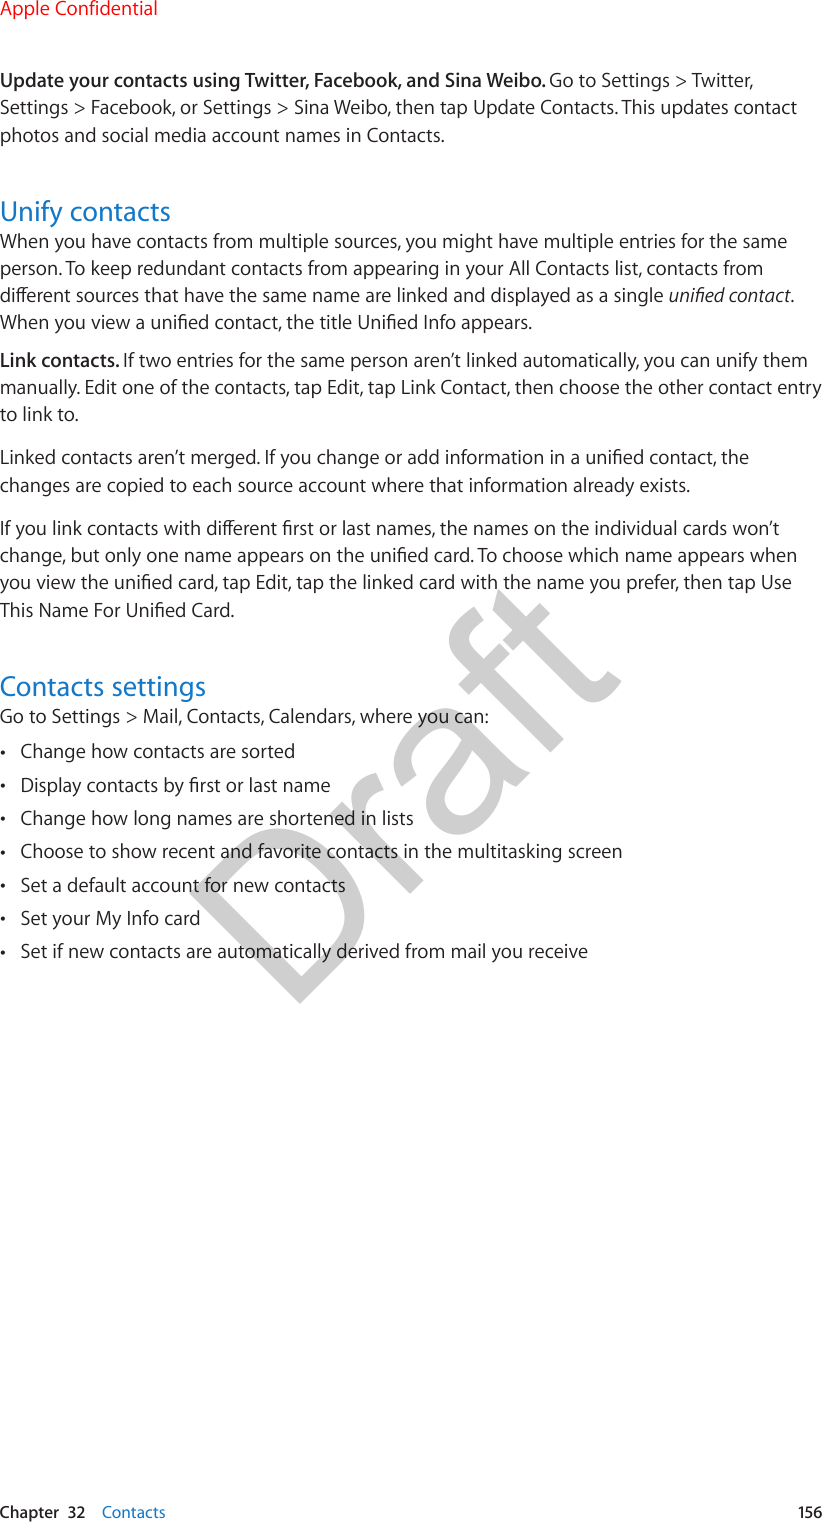 Chapter  32    Contacts  156Update your contacts using Twitter, Facebook, and Sina Weibo. Go to Settings &gt; Twitter, Settings &gt; Facebook, or Settings &gt; Sina Weibo, then tap Update Contacts. This updates contact photos and social media account names in Contacts.Unify contactsWhen you have contacts from multiple sources, you might have multiple entries for the same person. To keep redundant contacts from appearing in your All Contacts list, contacts from dierent sources that have the same name are linked and displayed as a single unied contact. When you view a unied contact, the title Unied Info appears. Link contacts. If two entries for the same person aren’t linked automatically, you can unify them manually. Edit one of the contacts, tap Edit, tap Link Contact, then choose the other contact entry to link to.Linked contacts aren’t merged. If you change or add information in a unied contact, the changes are copied to each source account where that information already exists.If you link contacts with dierent rst or last names, the names on the individual cards won’t change, but only one name appears on the unied card. To choose which name appears when you view the unied card, tap Edit, tap the linked card with the name you prefer, then tap Use This Name For Unied Card.Contacts settingsGo to Settings &gt; Mail, Contacts, Calendars, where you can: •Change how contacts are sorted •Display contacts by rst or last name •Change how long names are shortened in lists •Choose to show recent and favorite contacts in the multitasking screen •Set a default account for new contacts •Set your My Info card •Set if new contacts are automatically derived from mail you receiveApple ConfidentialDraft